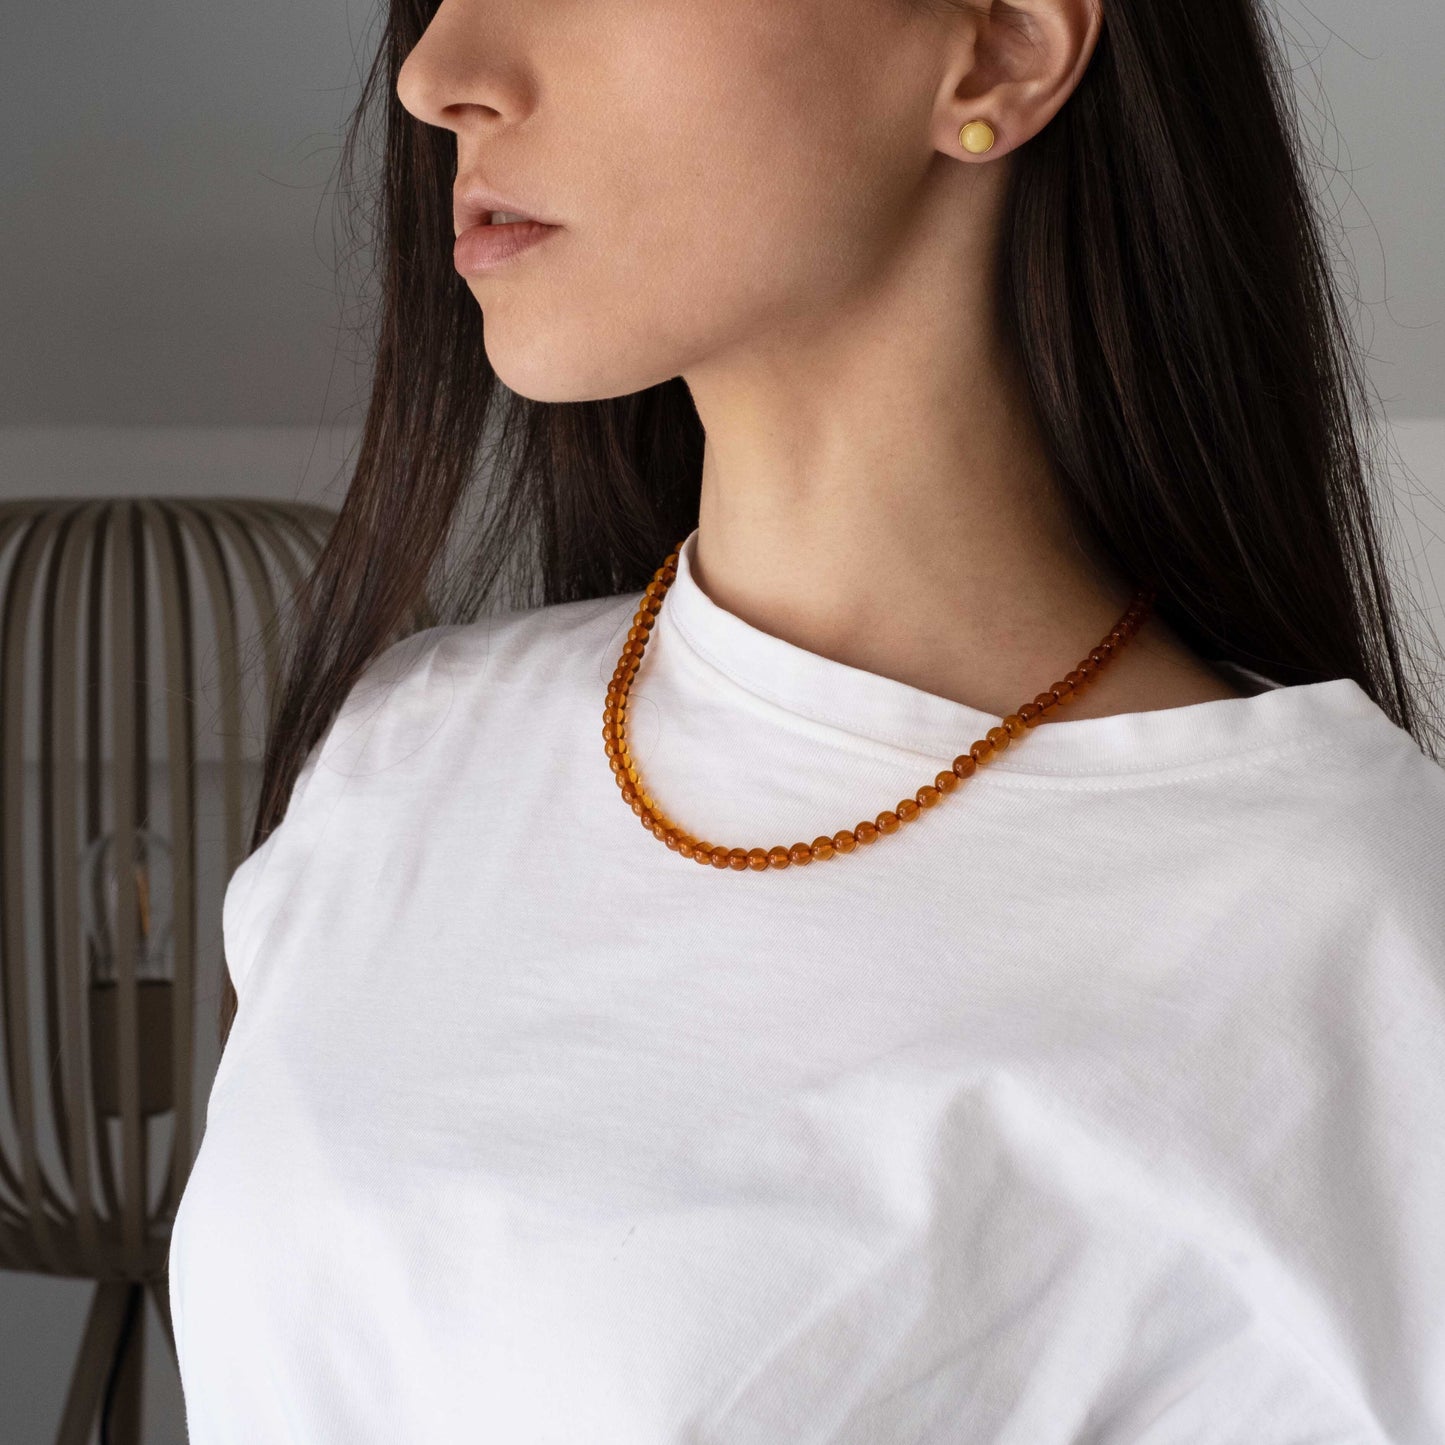 Natural amber necklace "Helena"